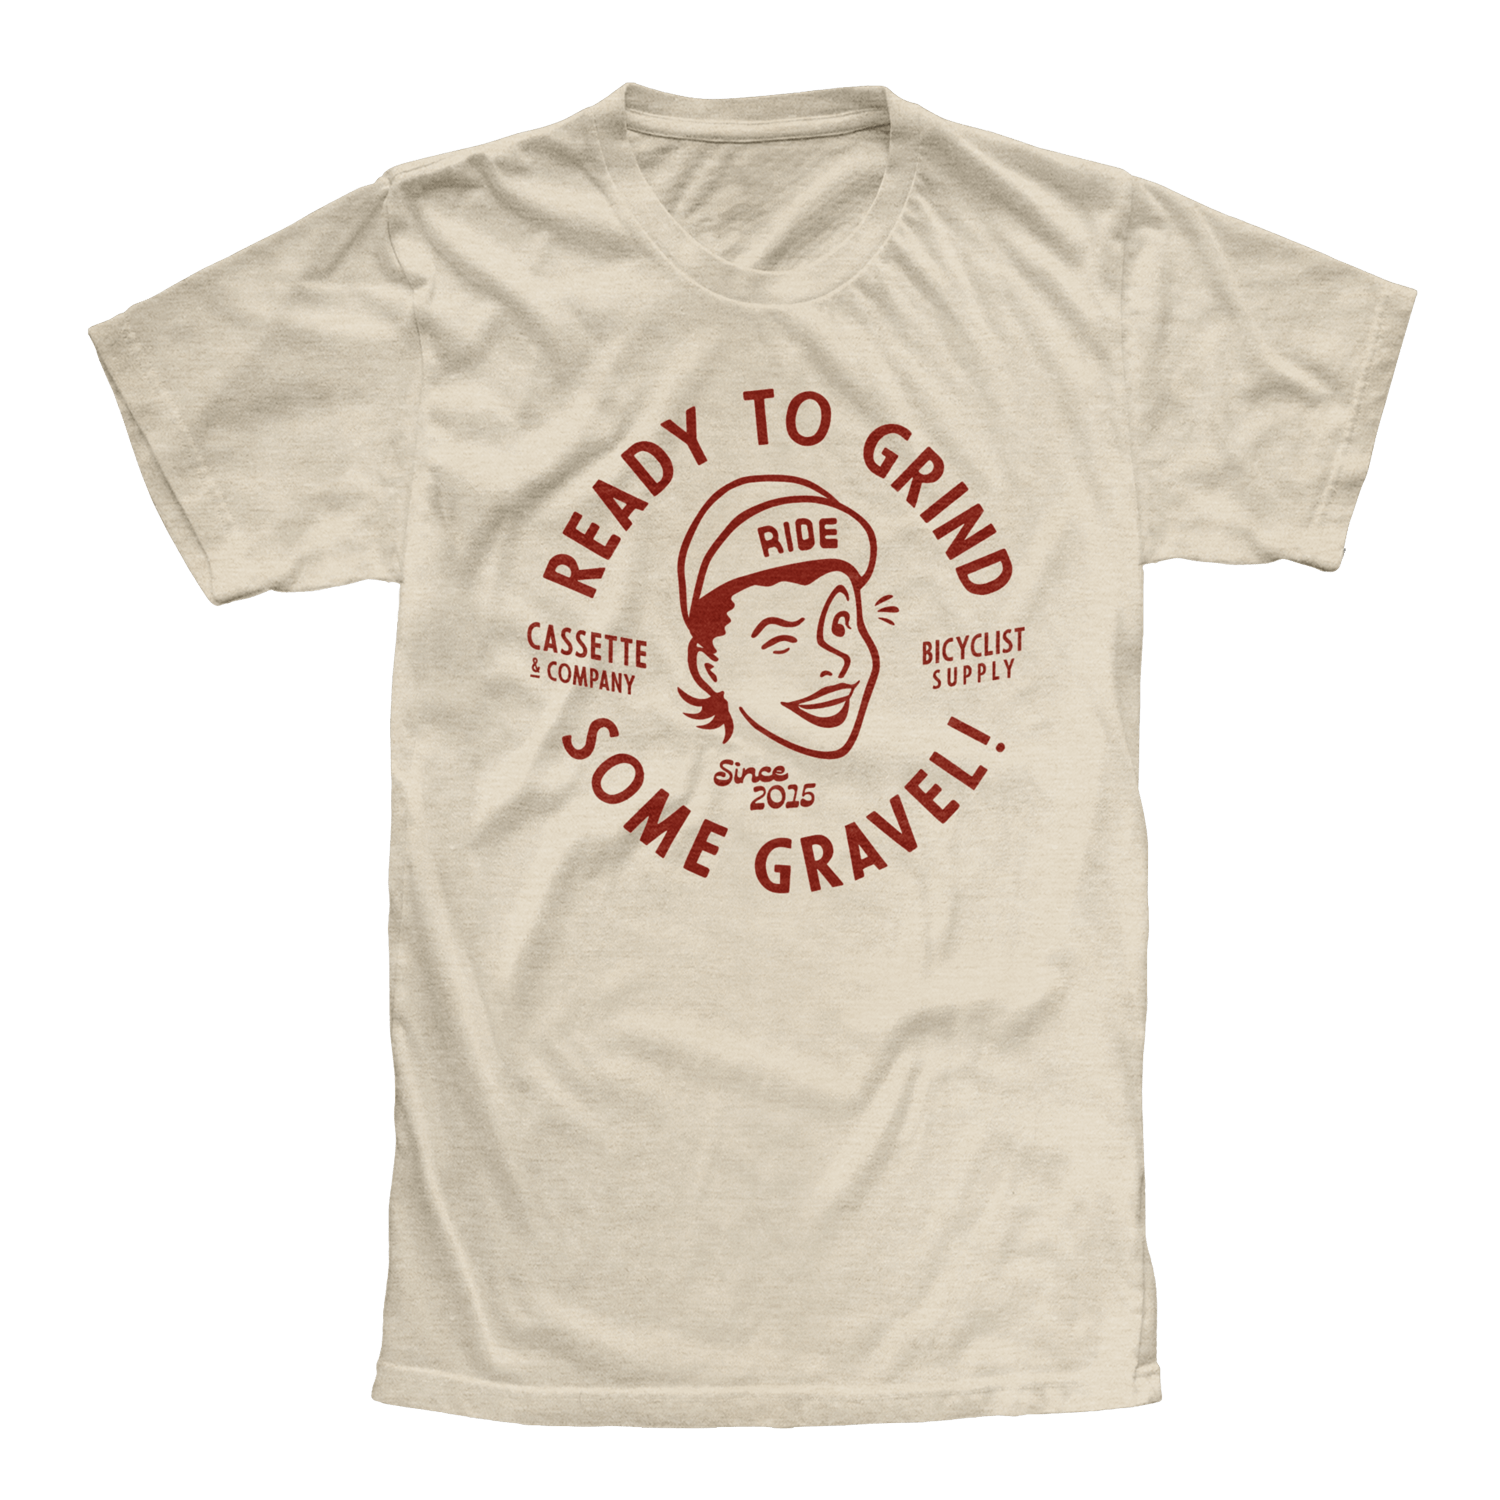 Women's specific tee with one color print with vintage graphic for gravel cyclists